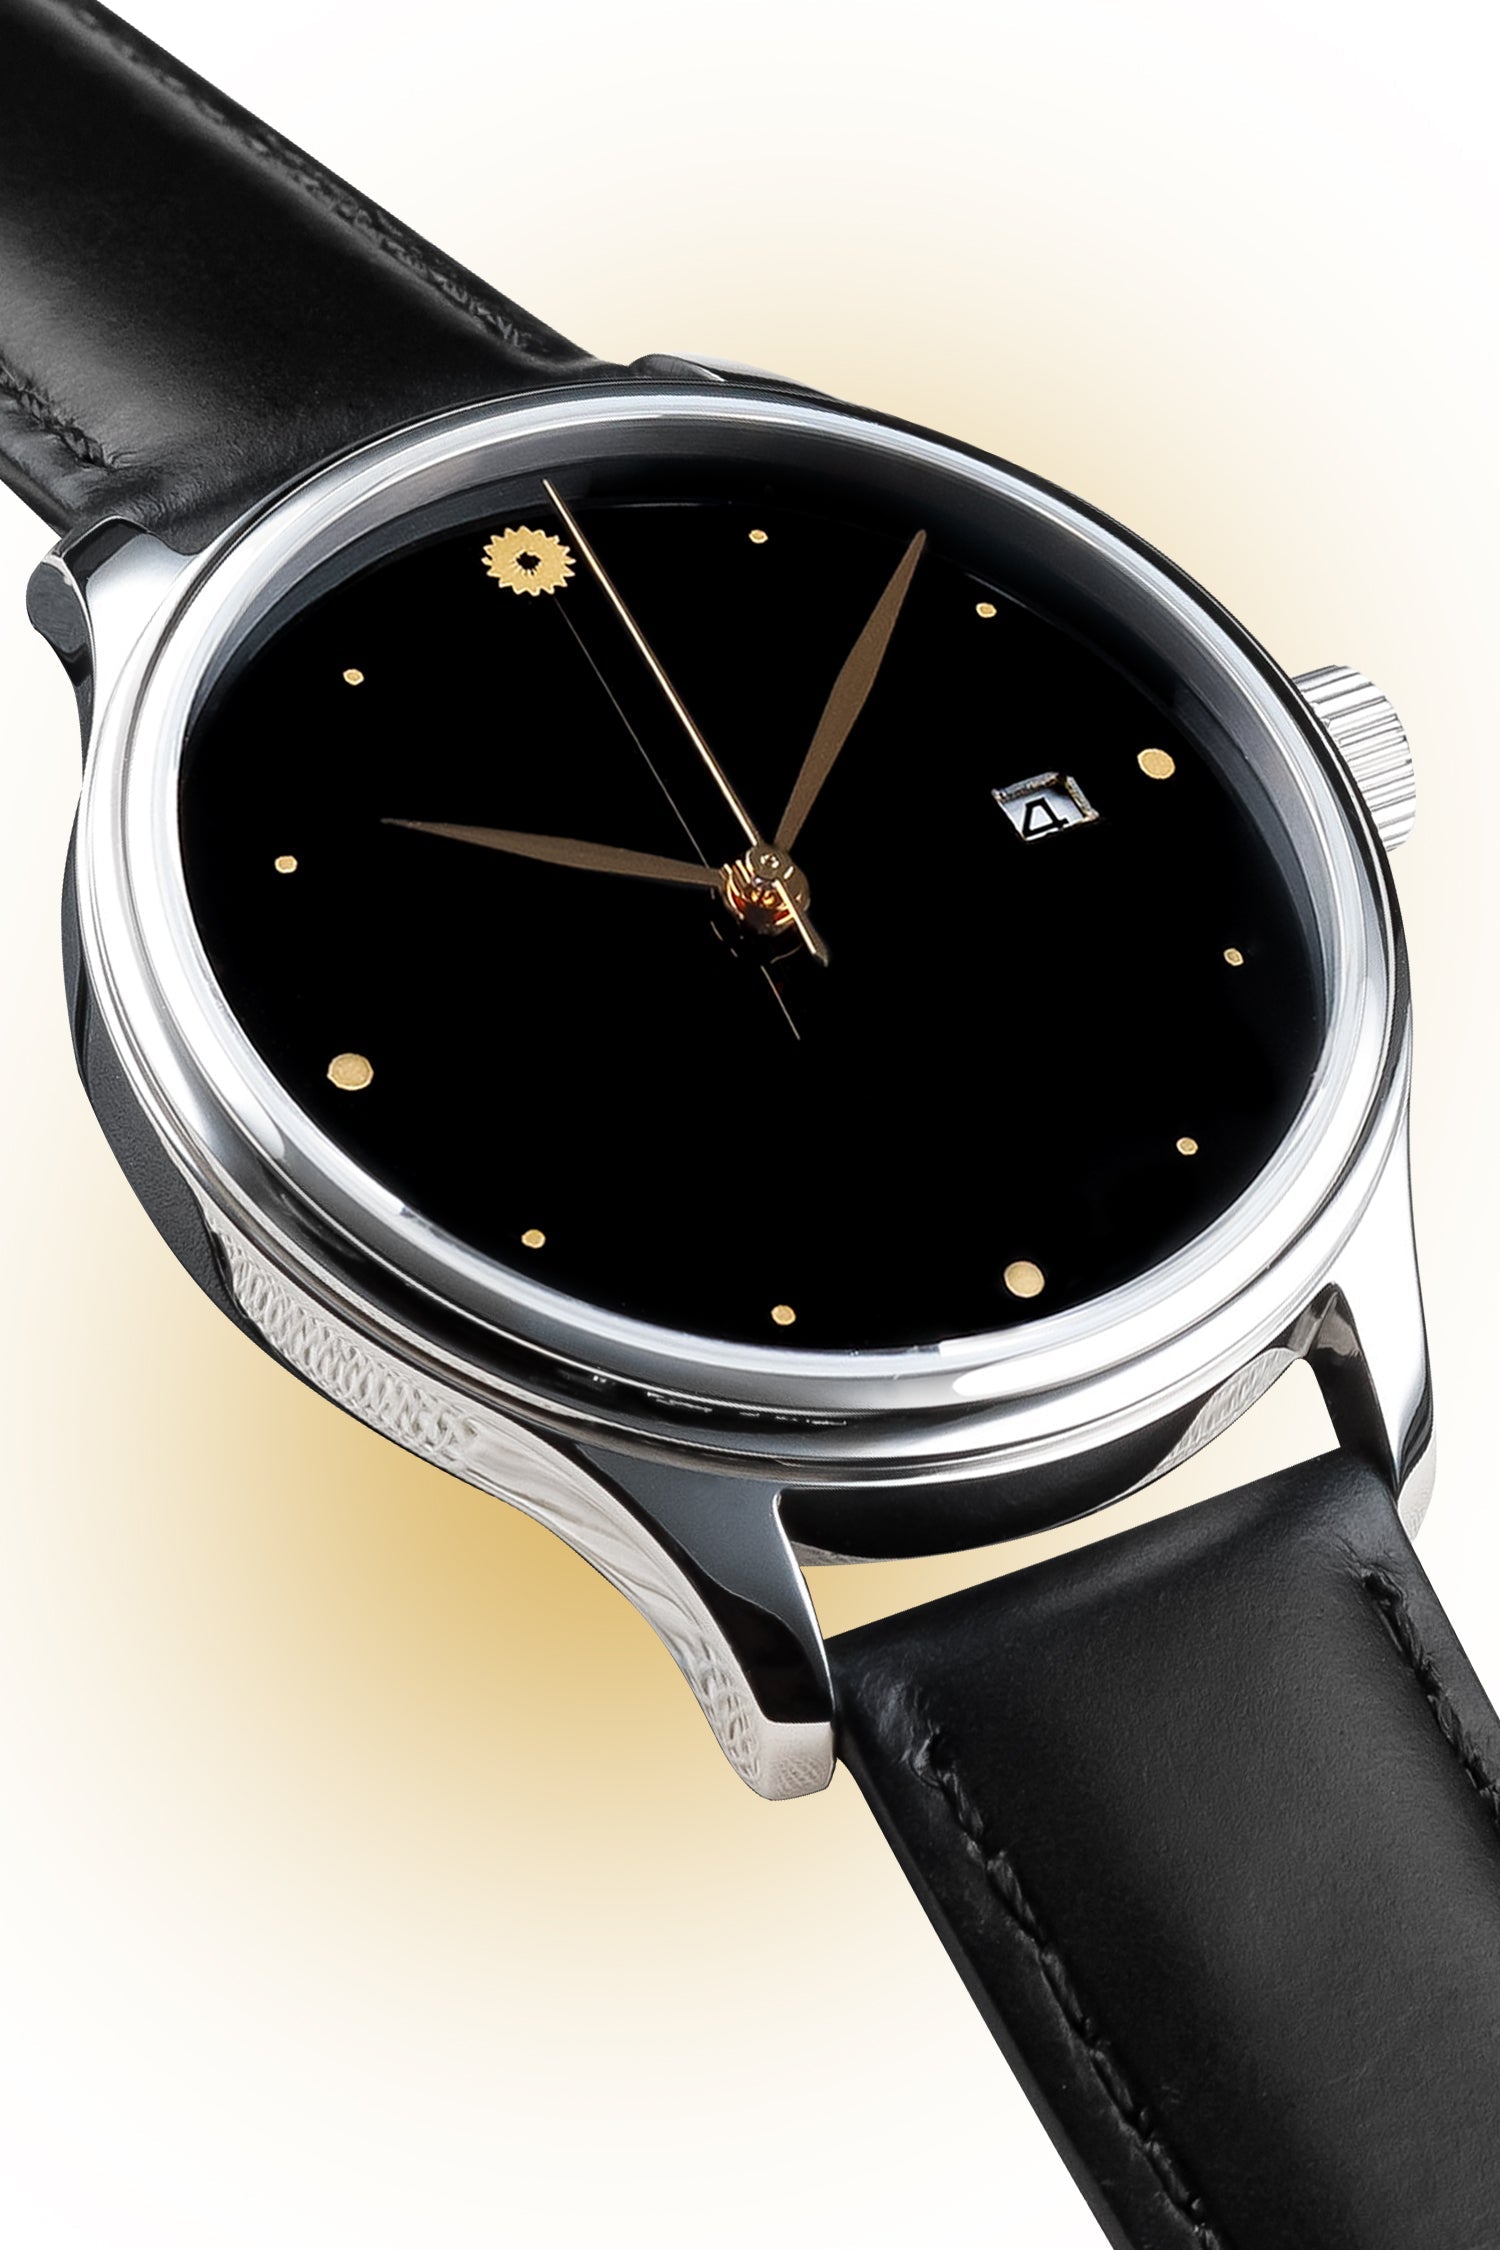 Experience exquisite Japanese craftsmanship with Wancher Watch Dream Urushi Black Lacquered Dial Automatic. Made from Echizen Japan's high-quality lacquerware, it features intricate design and automatic movement. Own a piece of Japan's cultural heritage and add sophistication to your wardrobe.